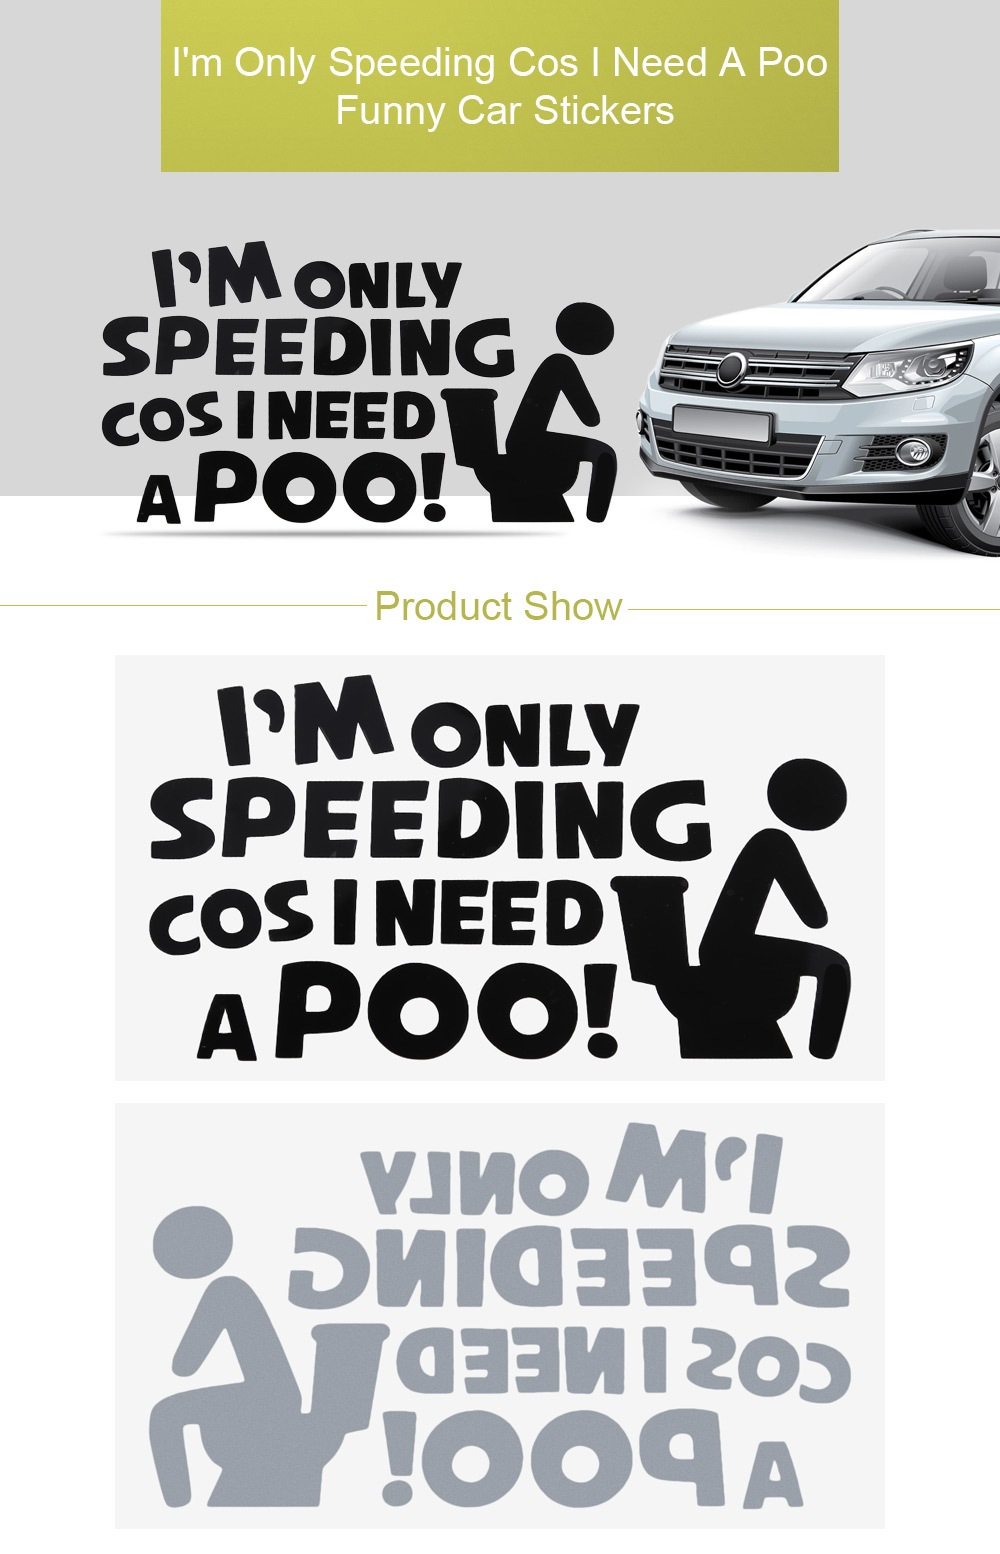 I'm Only Speeding Cos I Need A Poo Funny Car Sticker Reflective Automobile Decal- Black